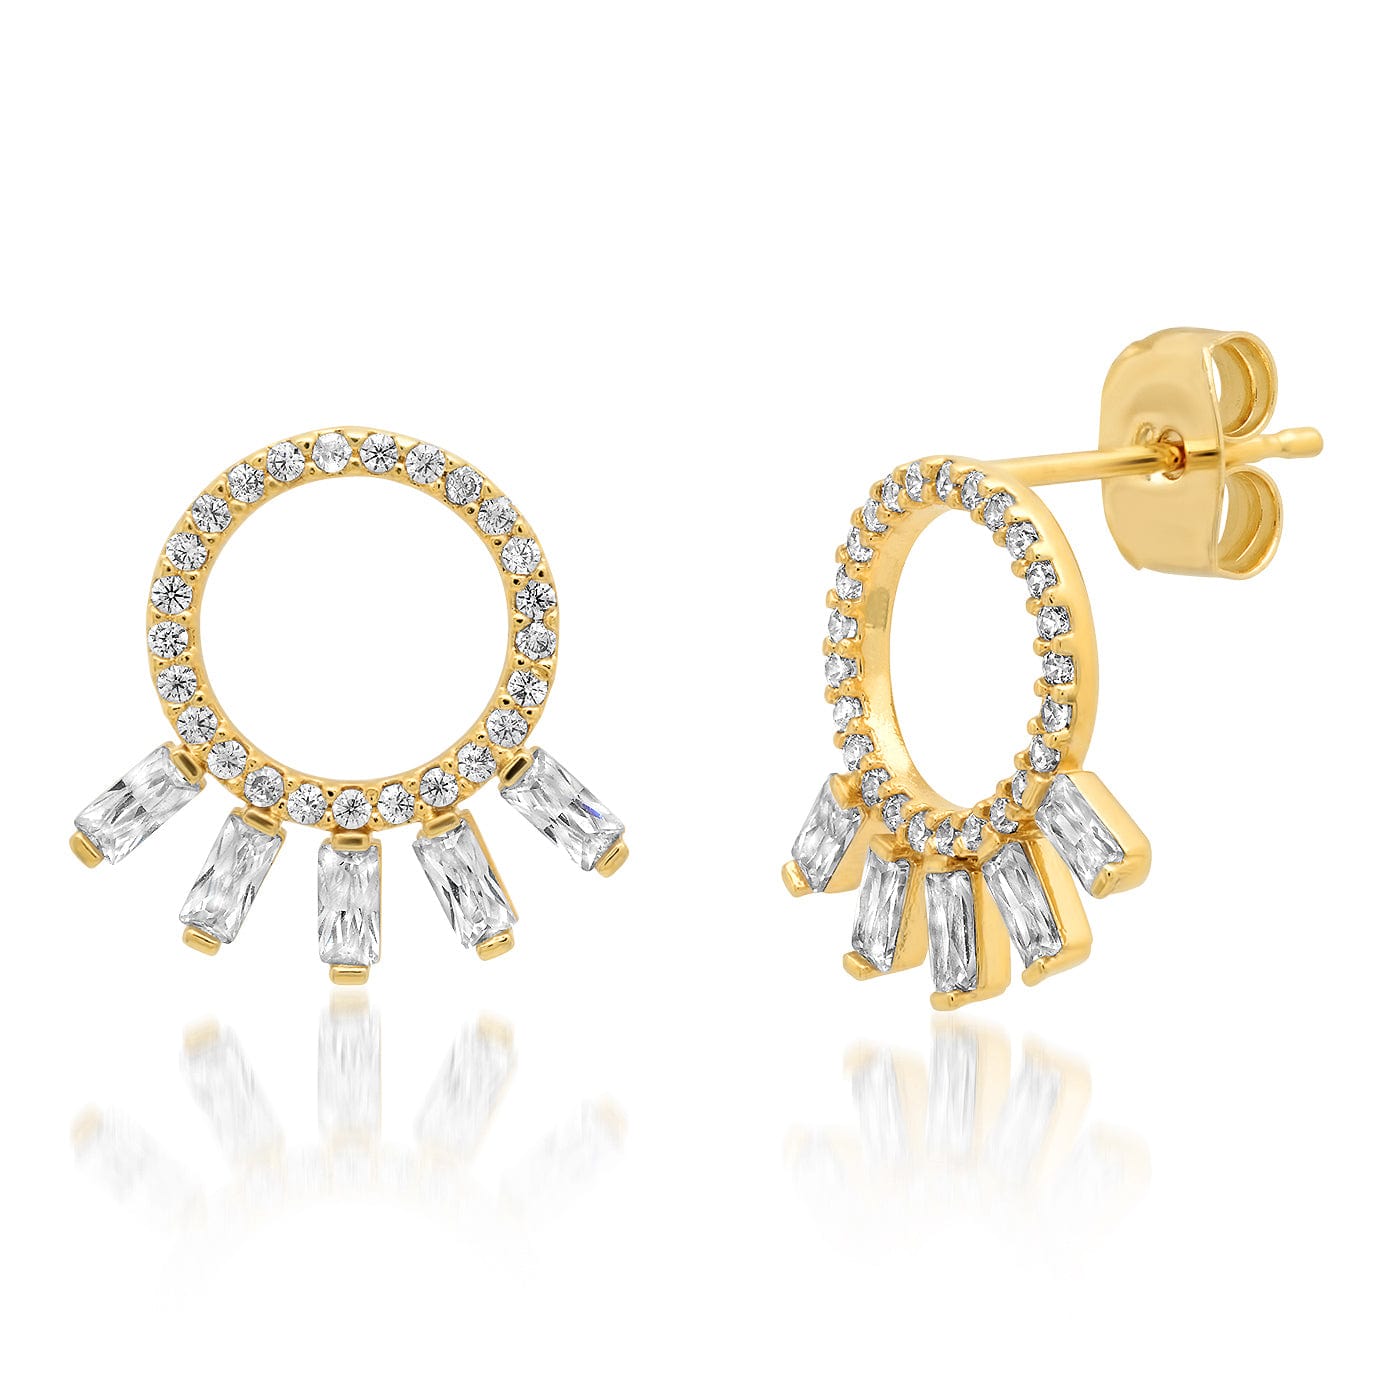 TAI JEWELRY Earrings Pave Sideways Hoops With Baguette Accents